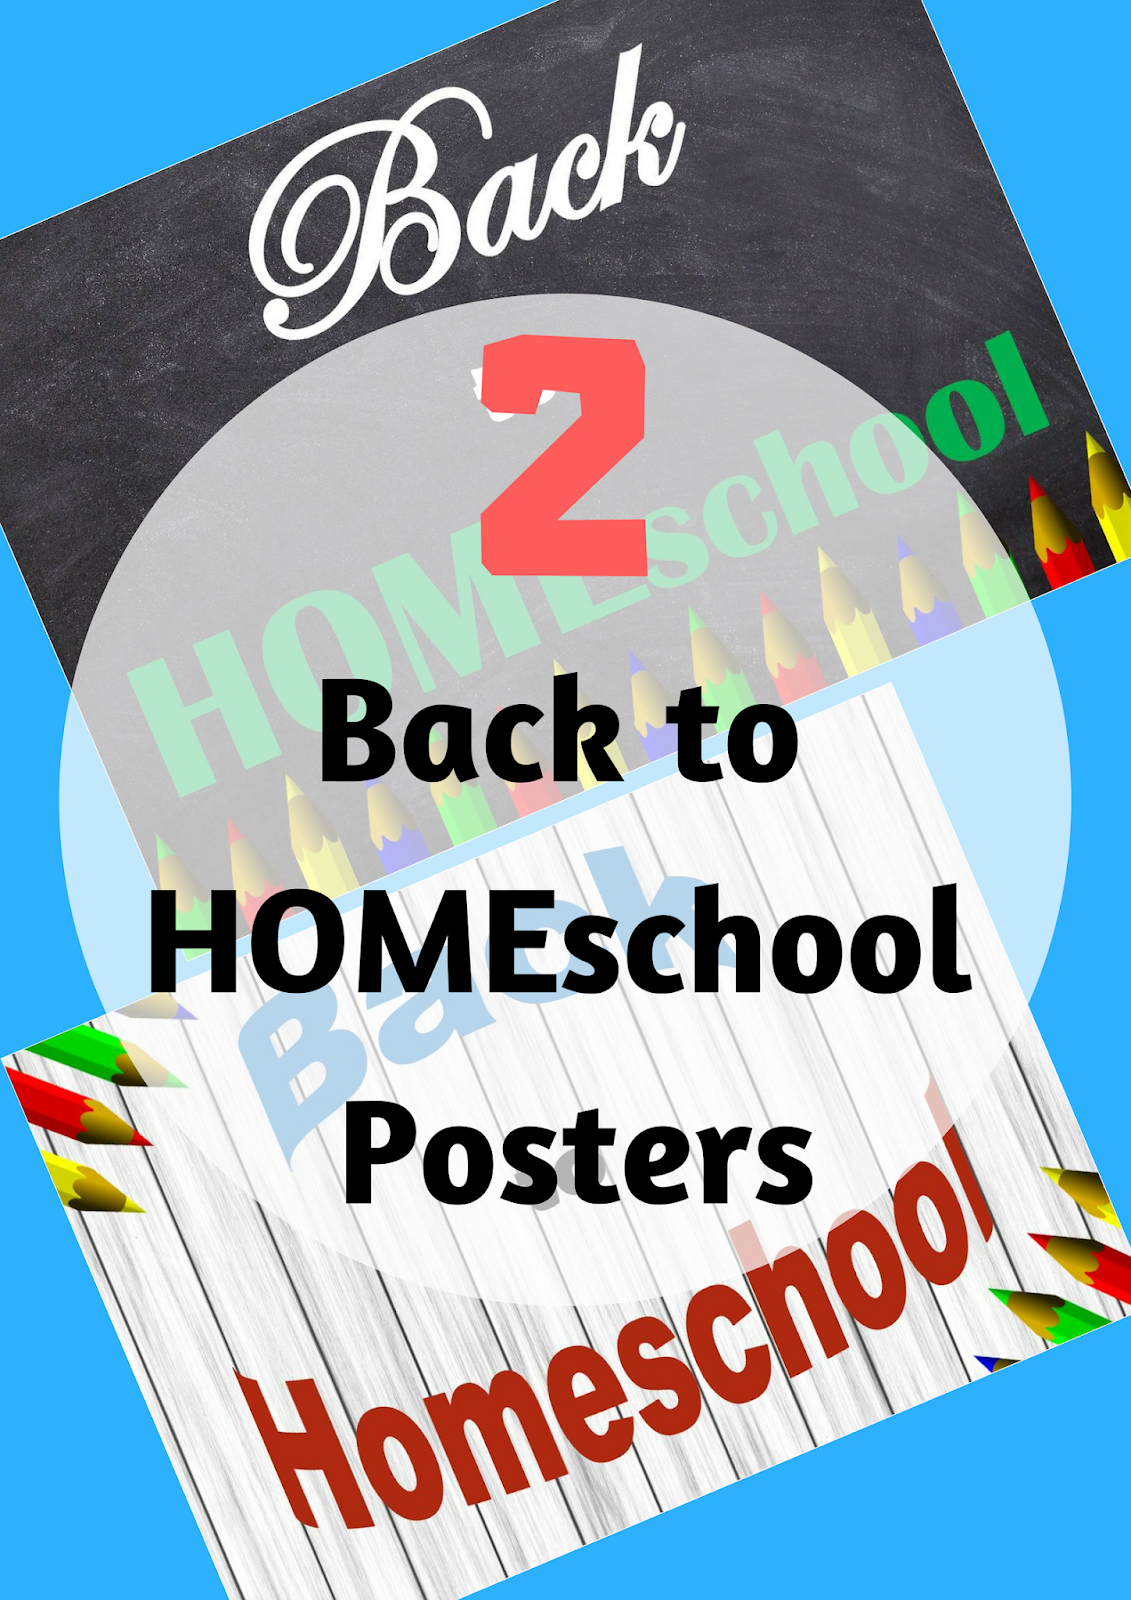 2-back-to-homeschool-posters-ihsaan-home-academy-shop